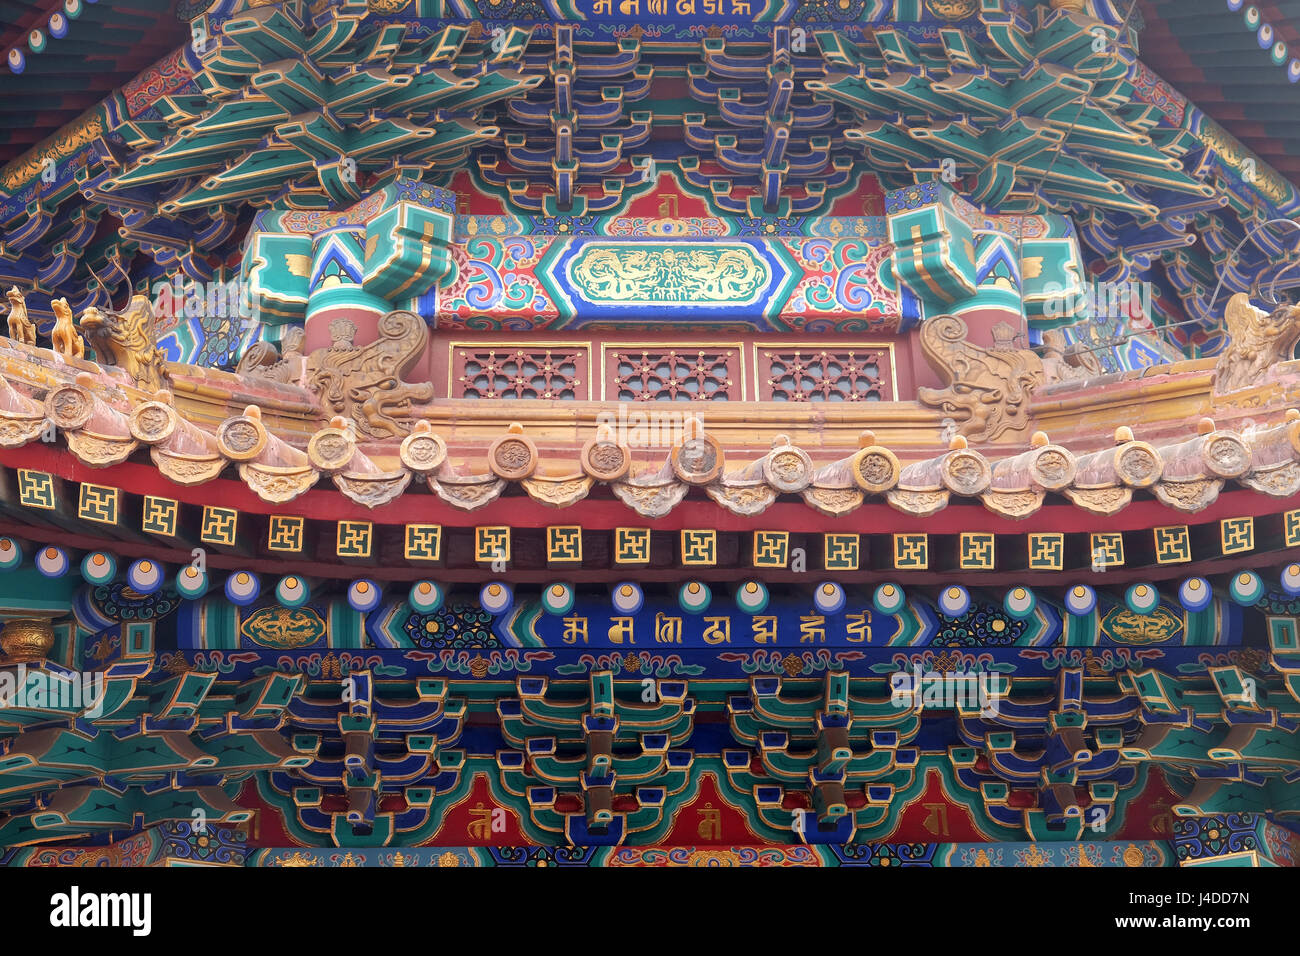 Lama Yonghe Temple in Beijing, China, February 25, 2016. Stock Photo